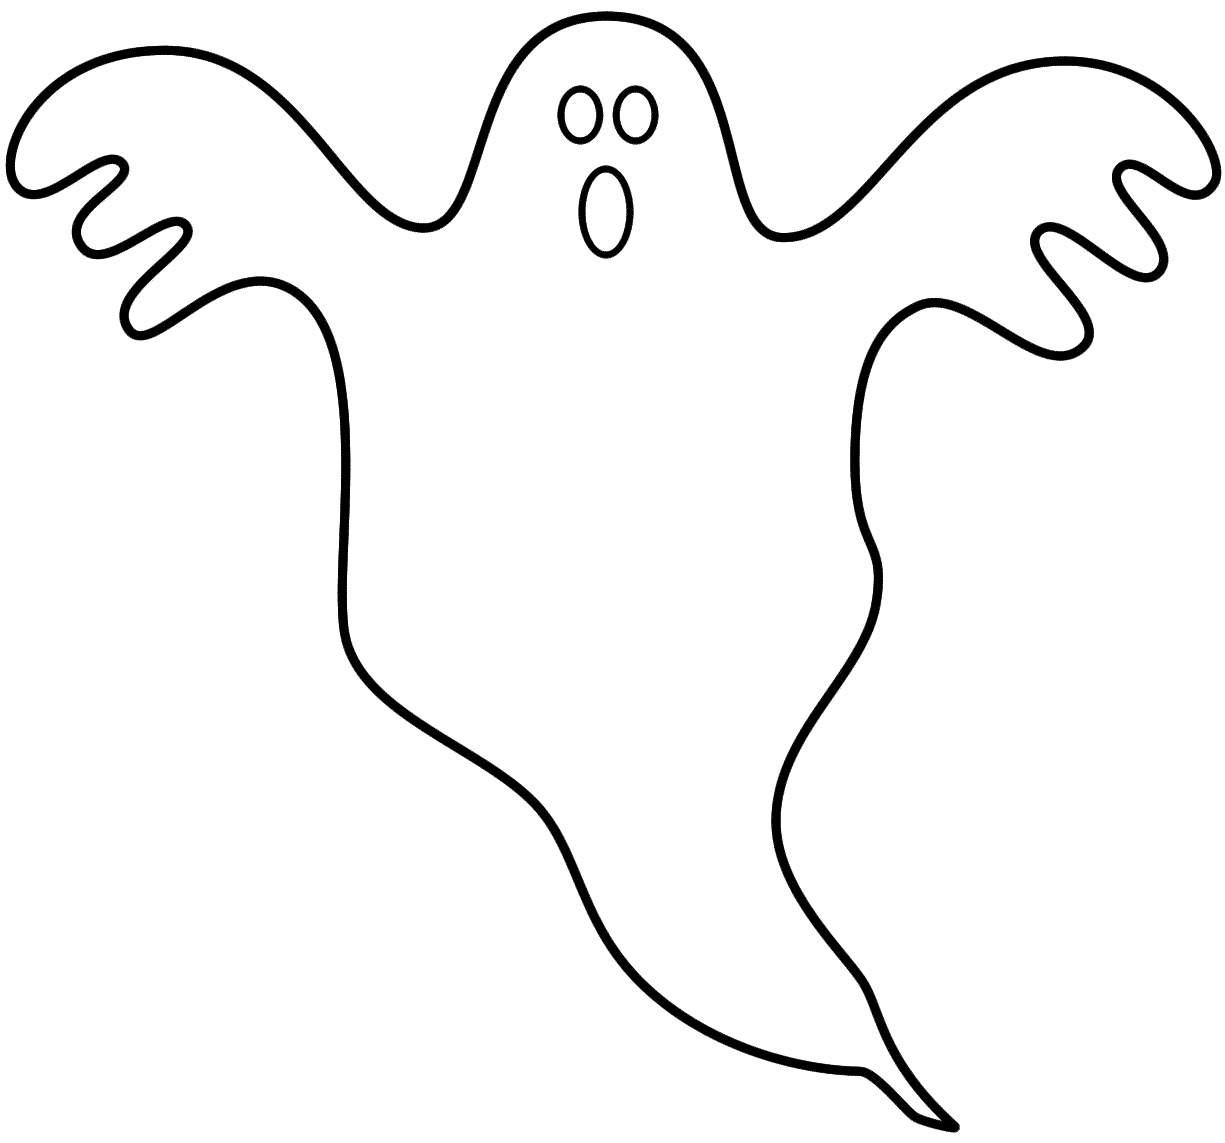 Boo Ghost Coloring Page - Coloring Pages For All Ages